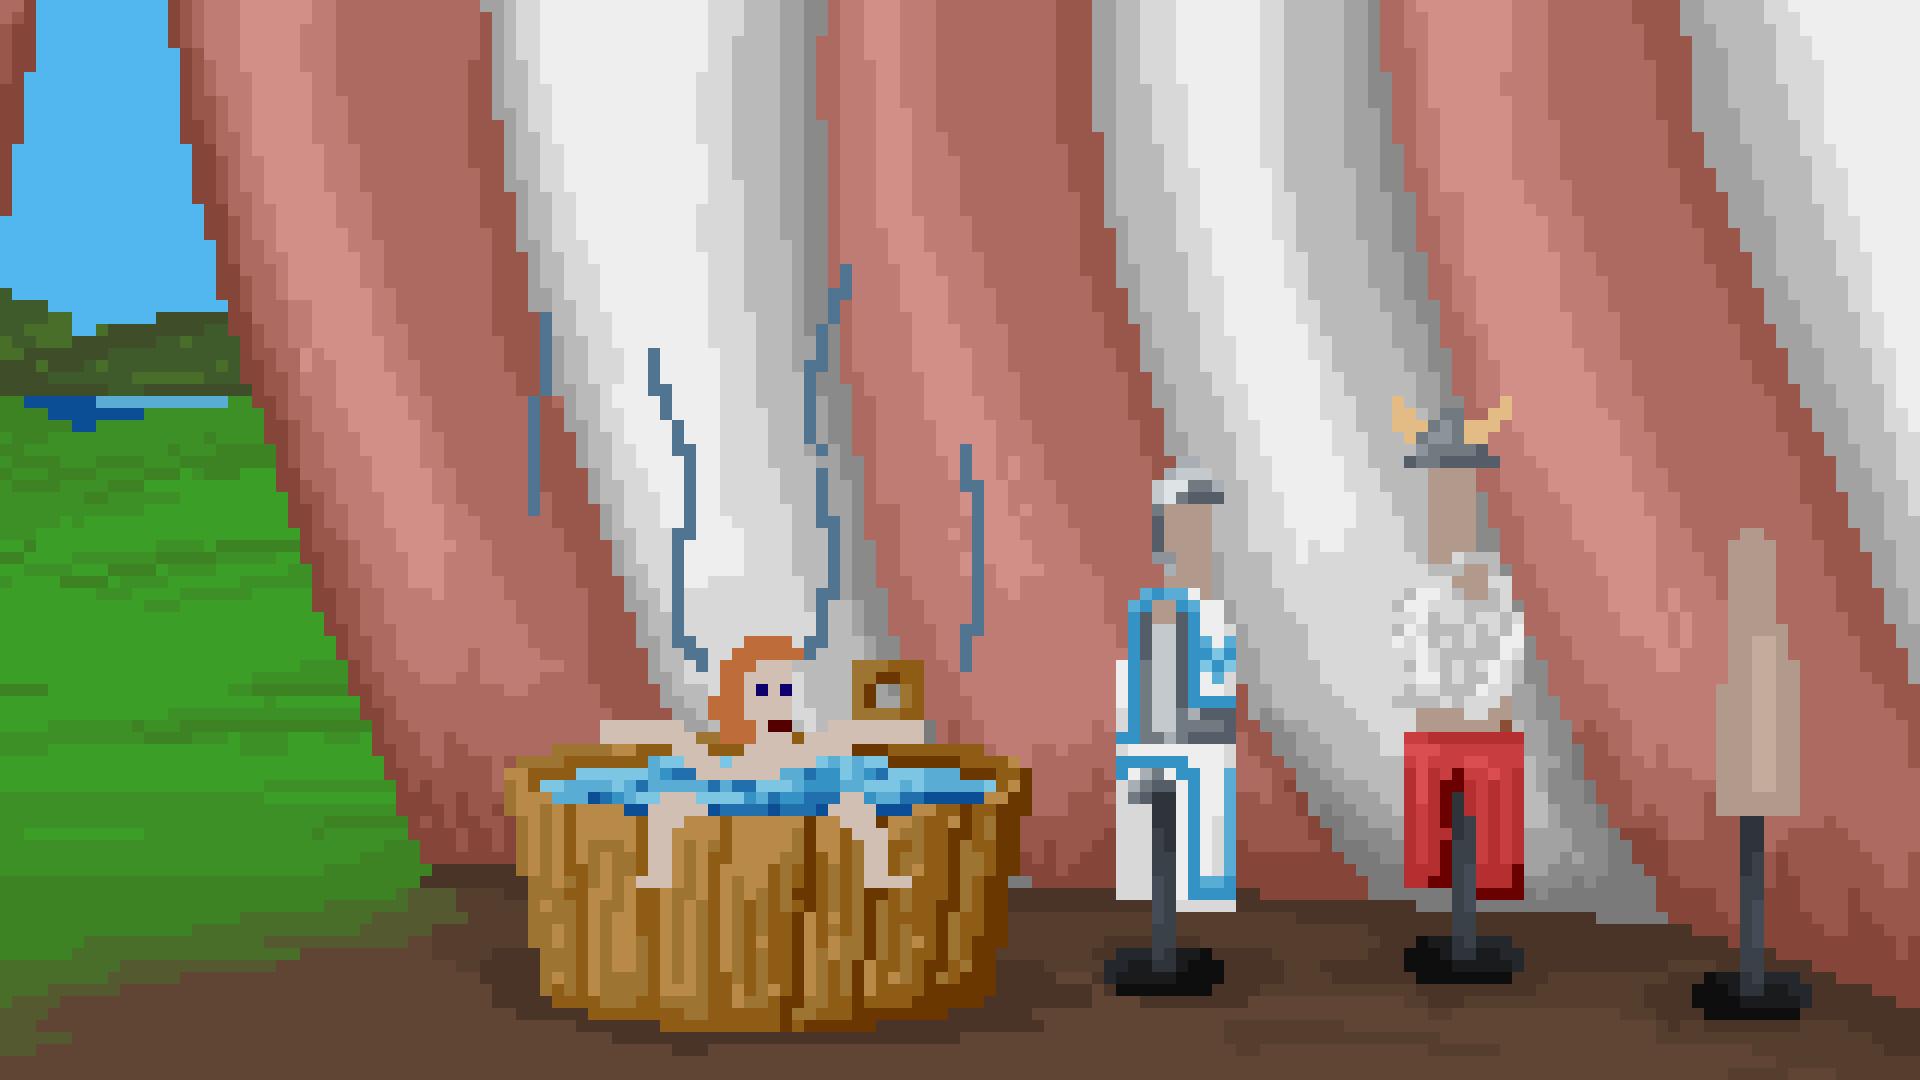 McPixel 3 - a red-haired man sitting in a wooden tub